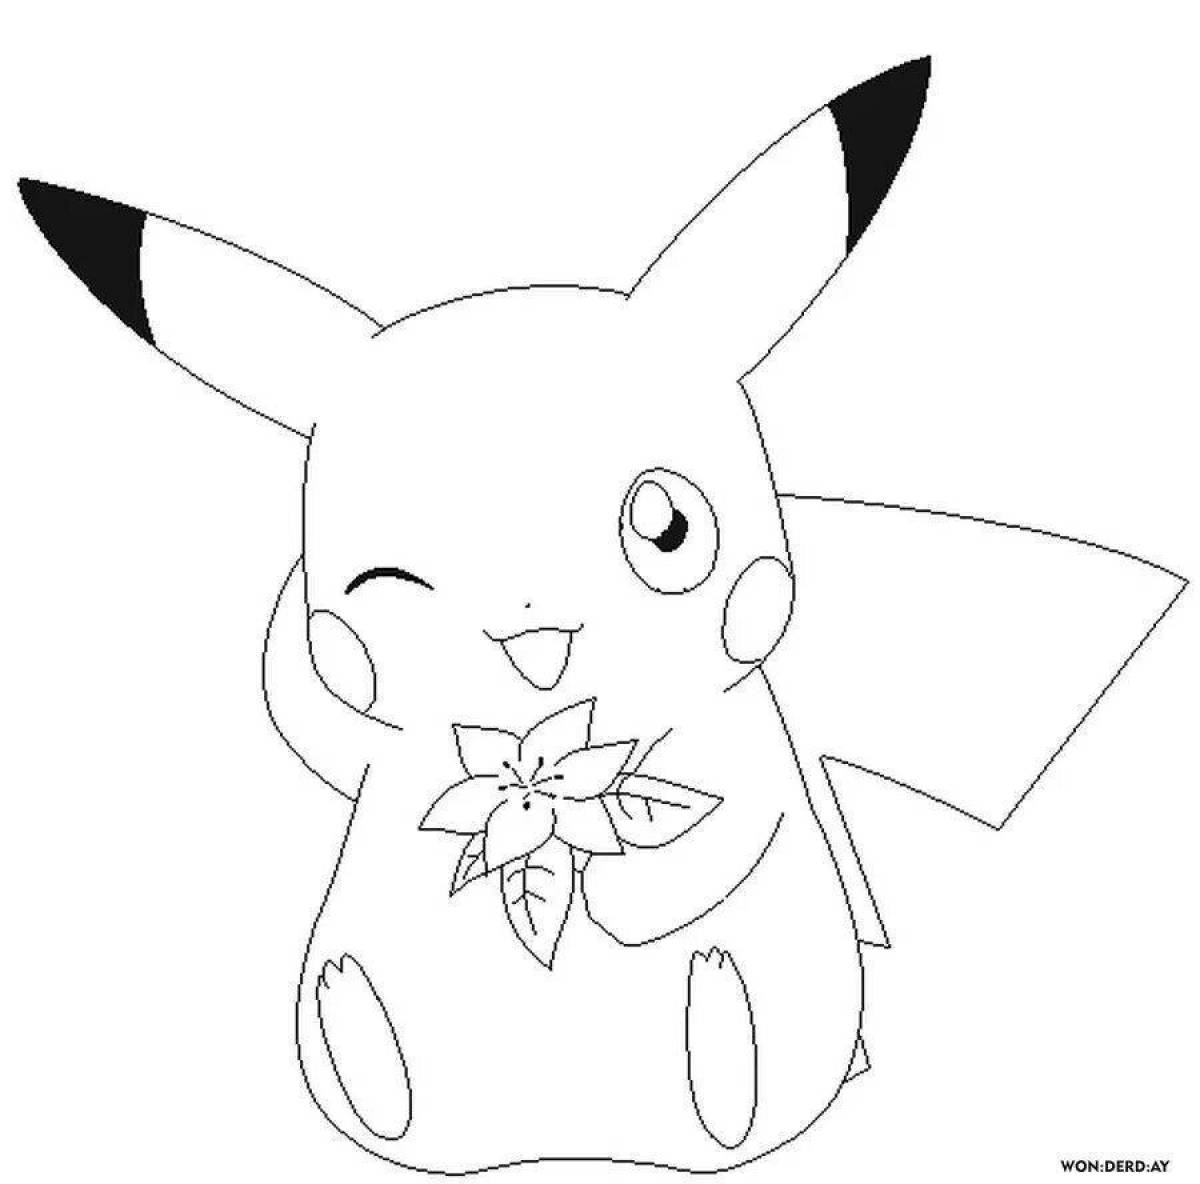 Animated pikachu coloring page